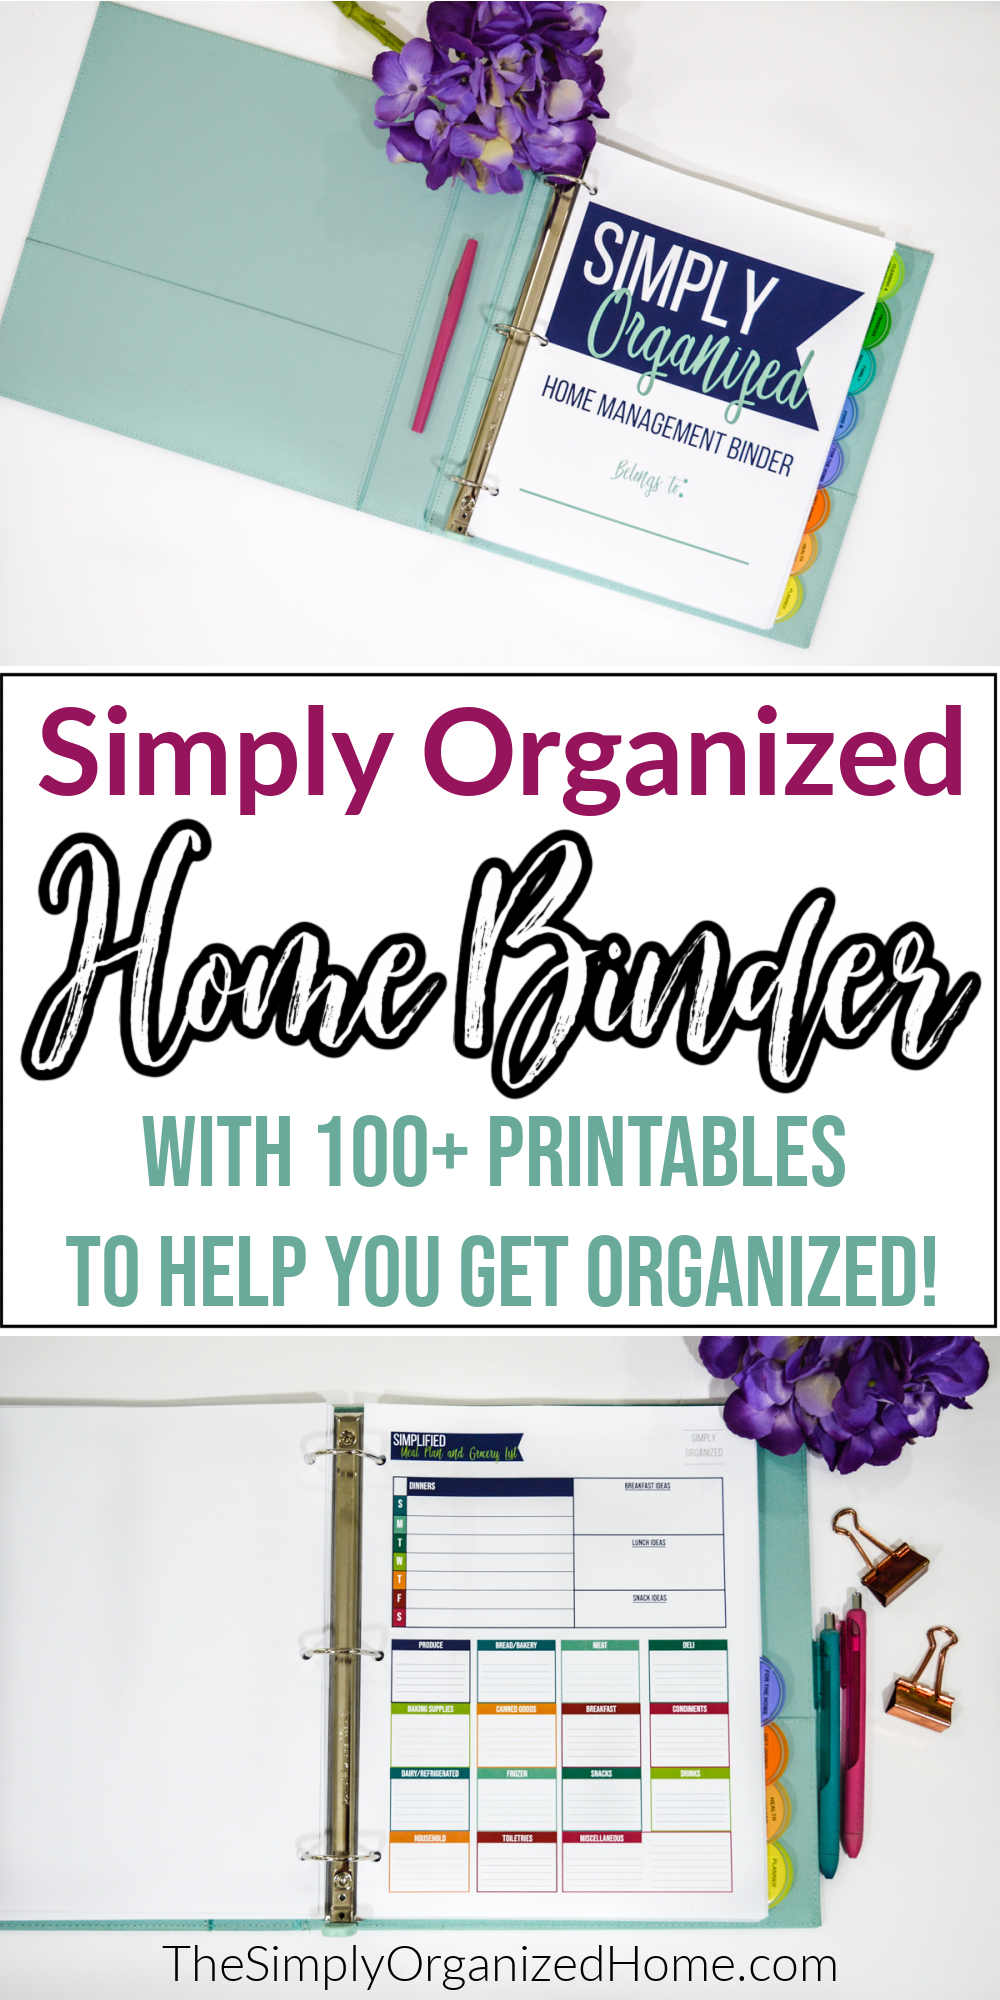 https://www.thesimplyorganizedhome.com/wp-content/uploads/2020/08/Simply-Organized-Home-Binder-PINTEREST-1.png